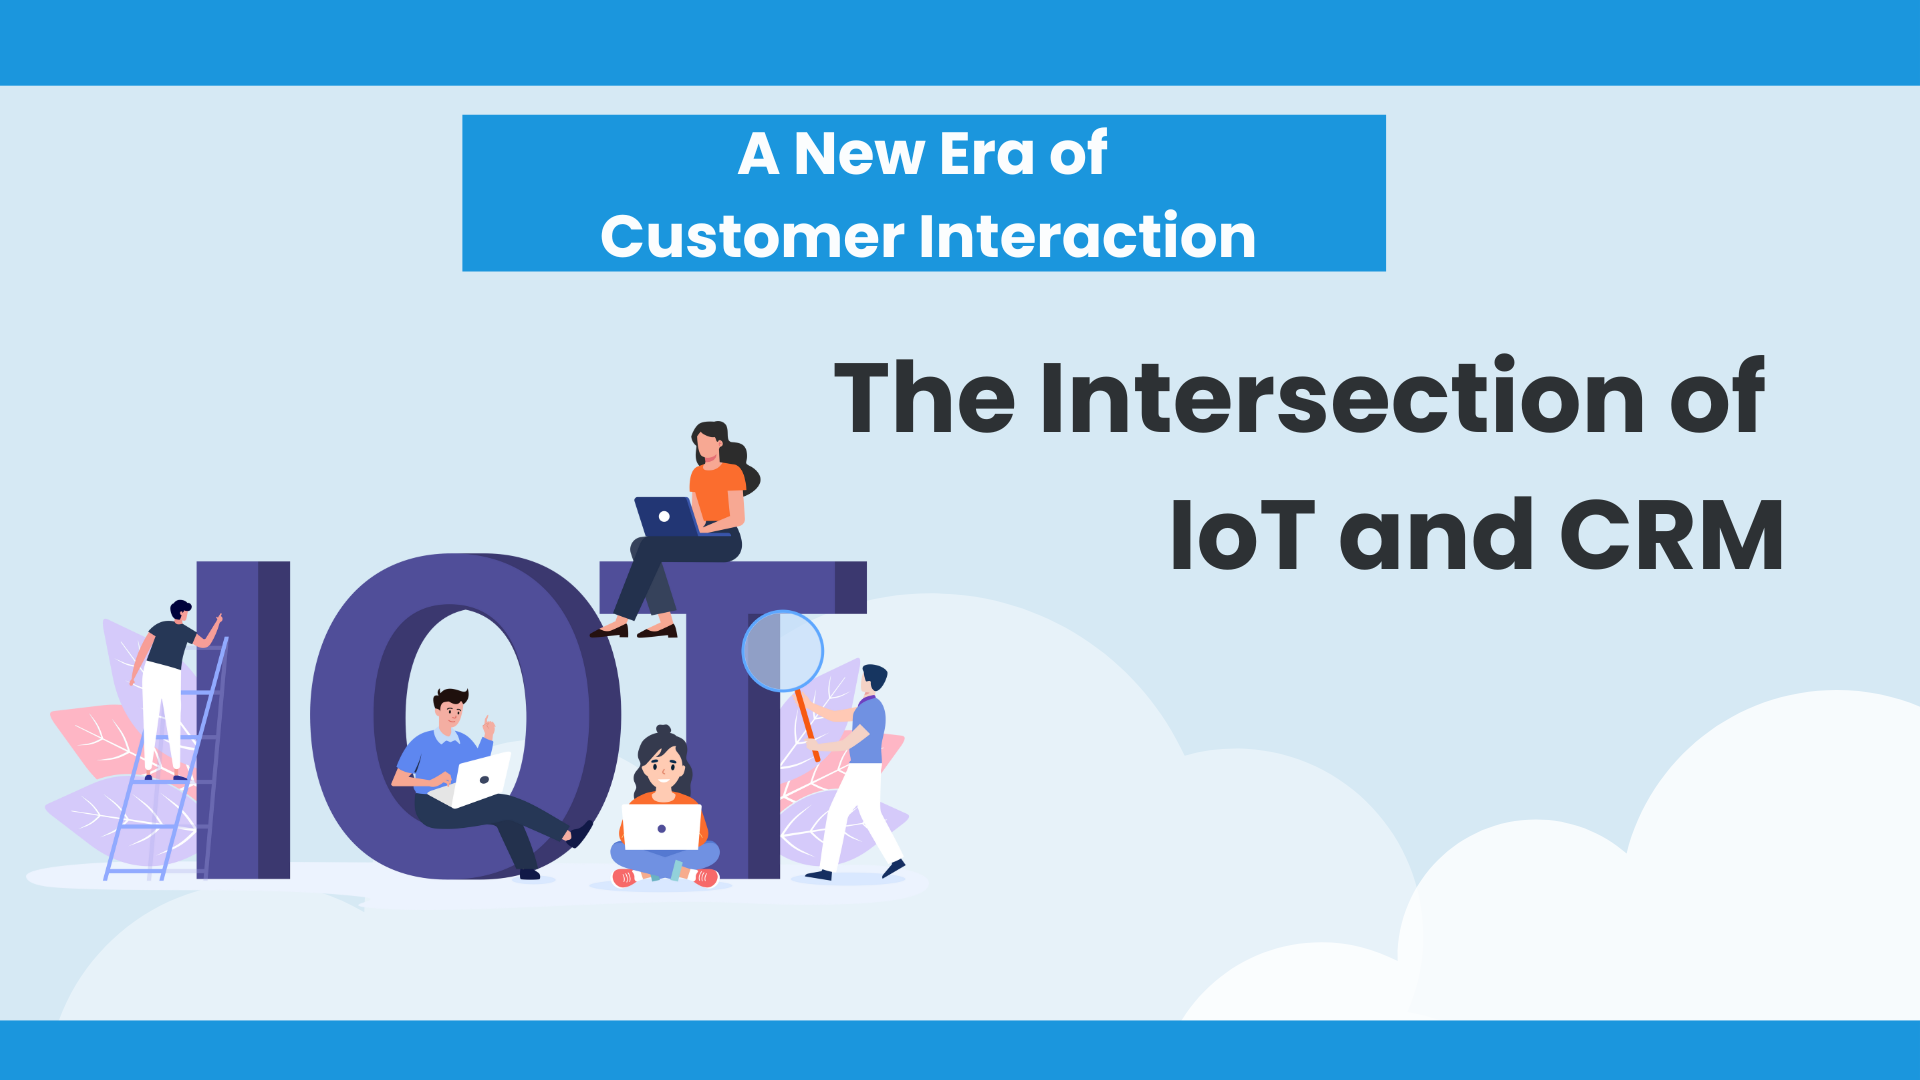 IoT and CRM